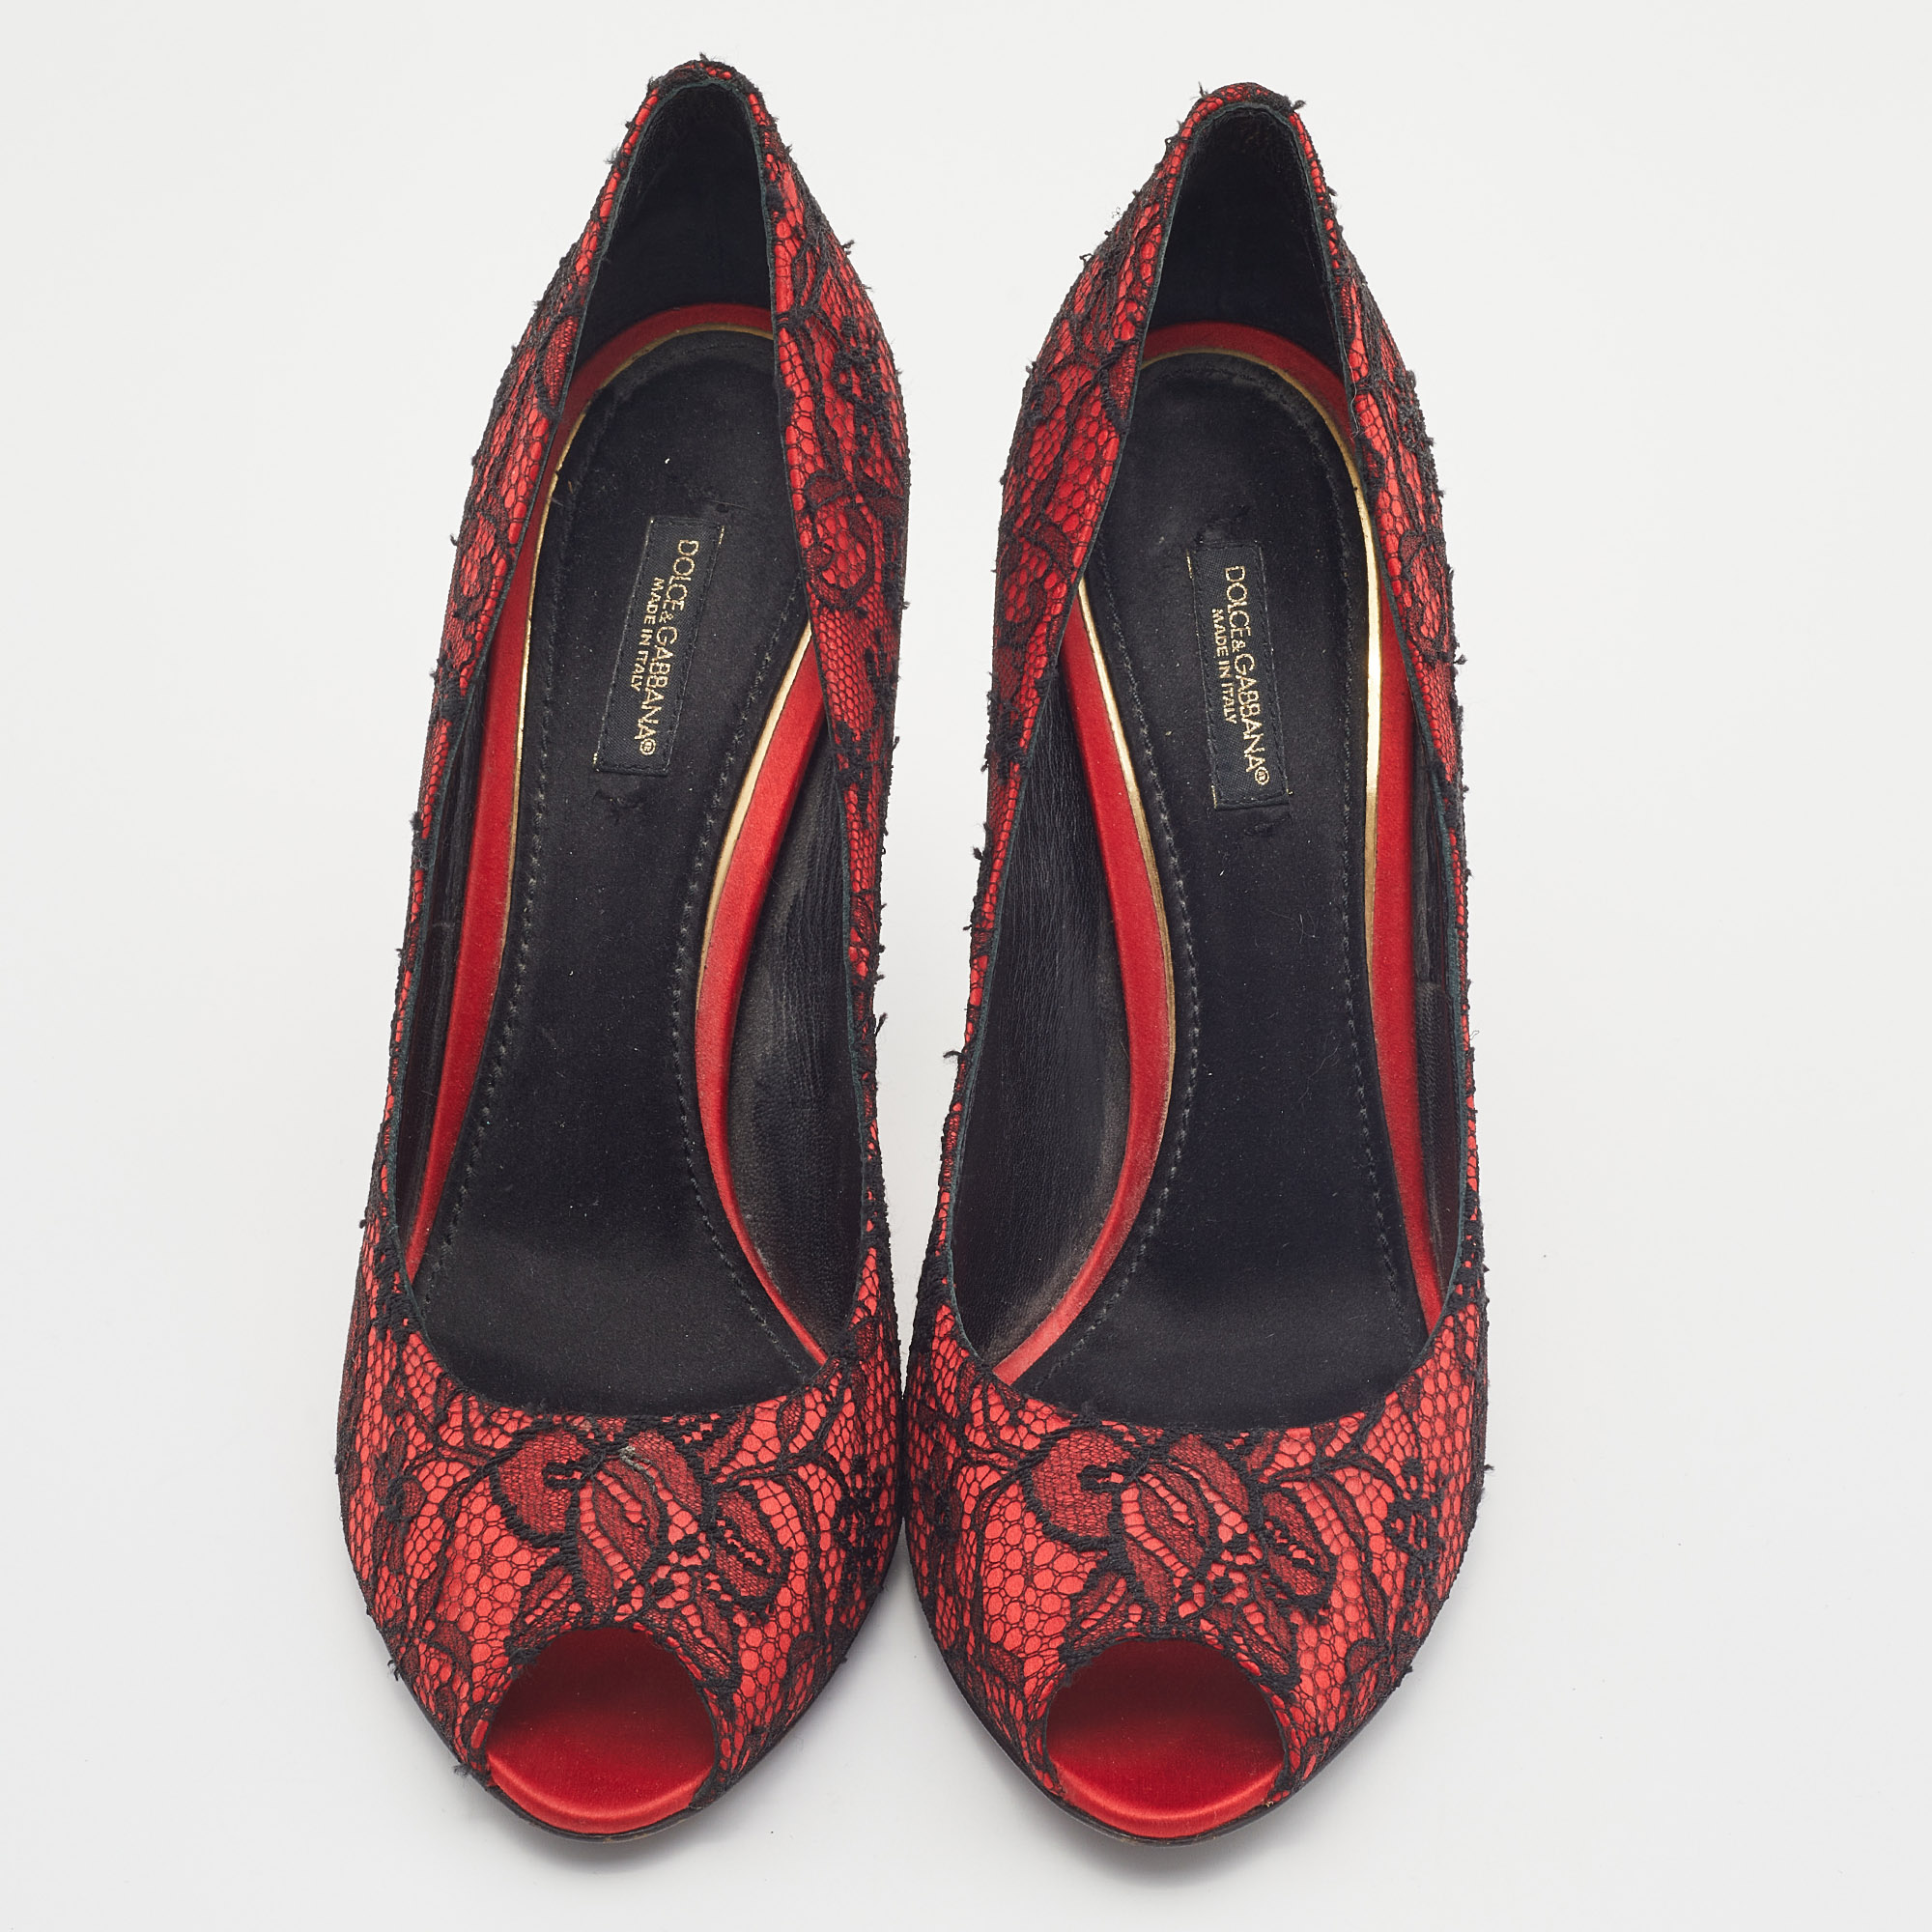 Dolce & Gabbana Red/Black Satin And Lace Peep Toe Pumps Size 40